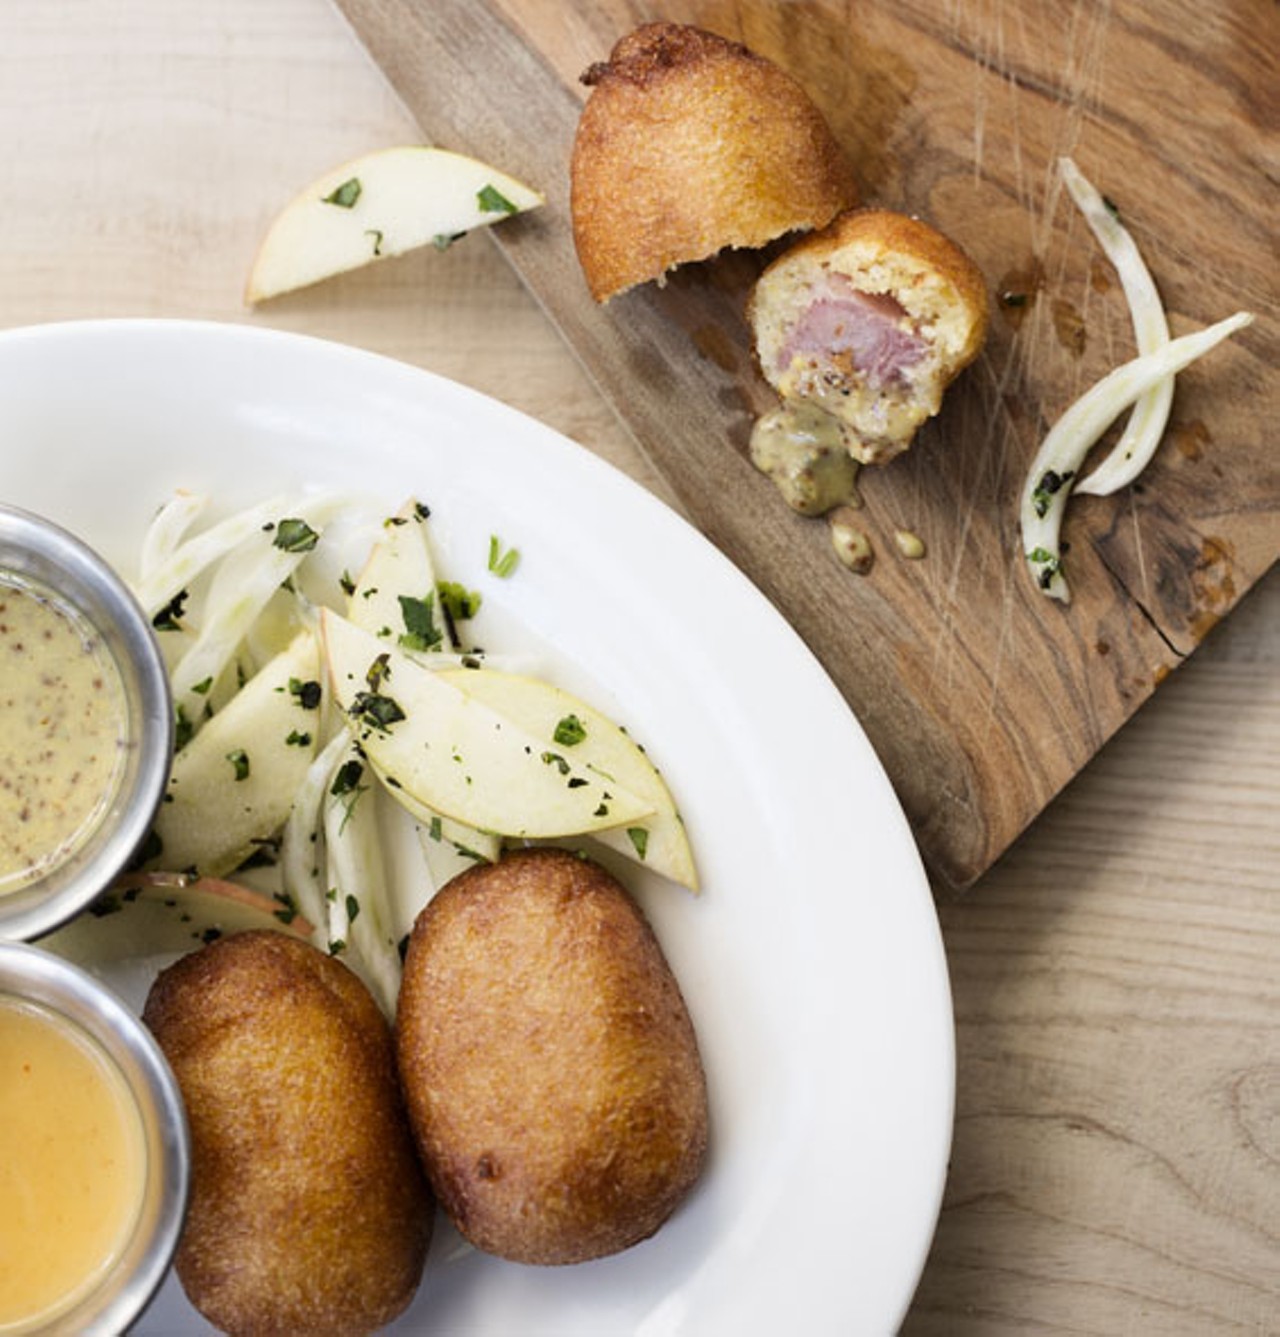 "Mortadella Corndogs" are made with moretti beer Cheese, jalapeno honey mustard and a basil-fennel salad.